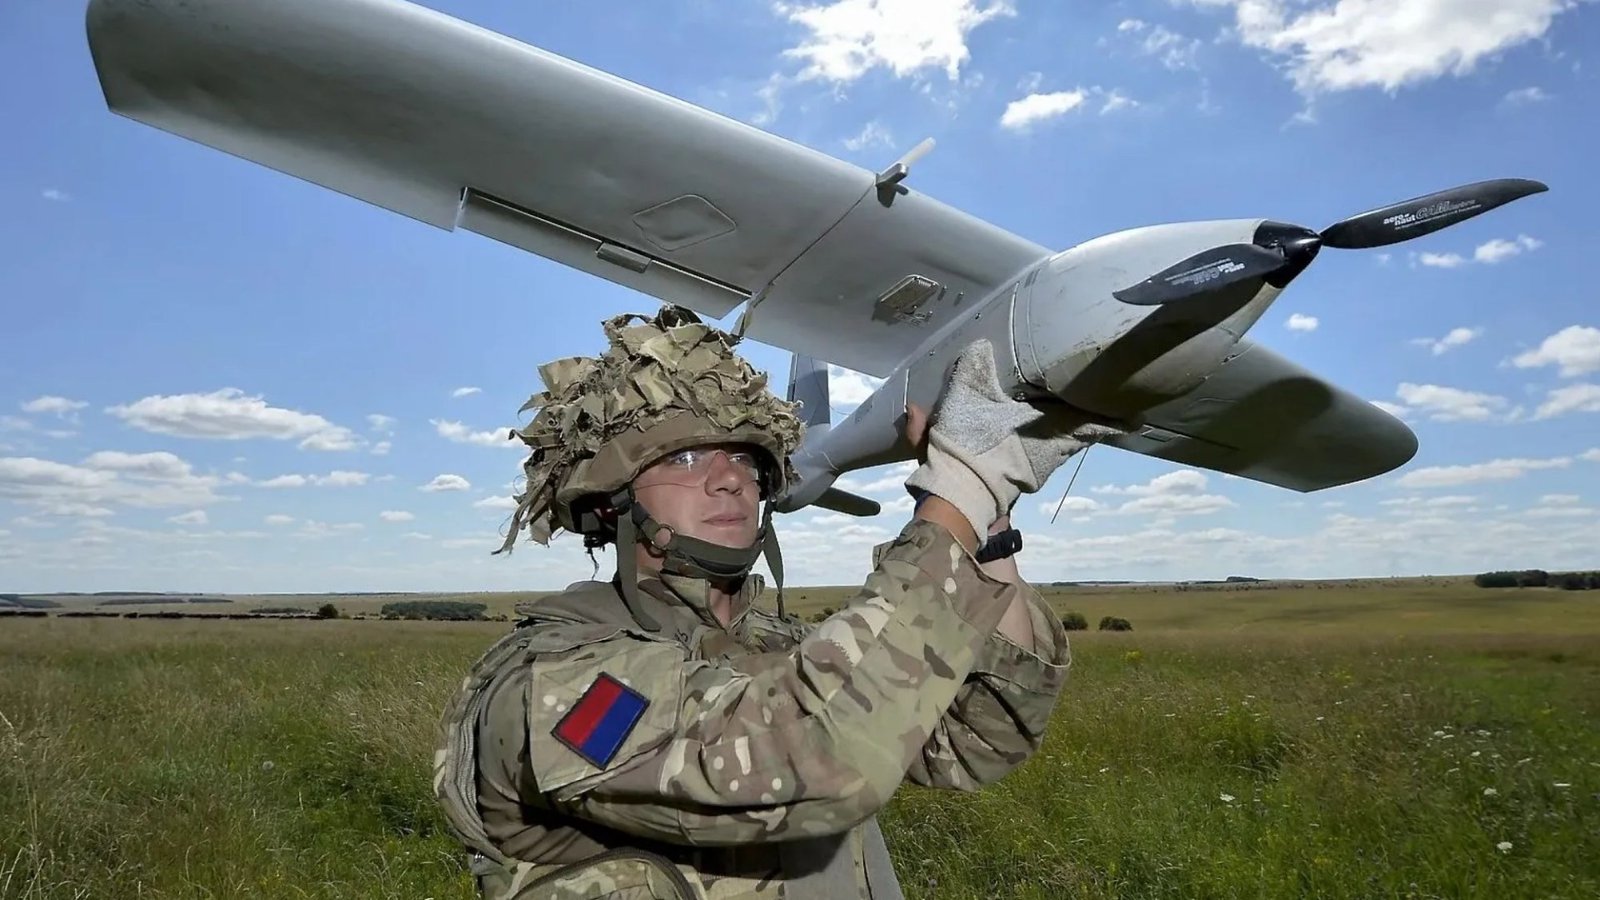 Britain spending billions developing our drone capabilities over the next 10 years